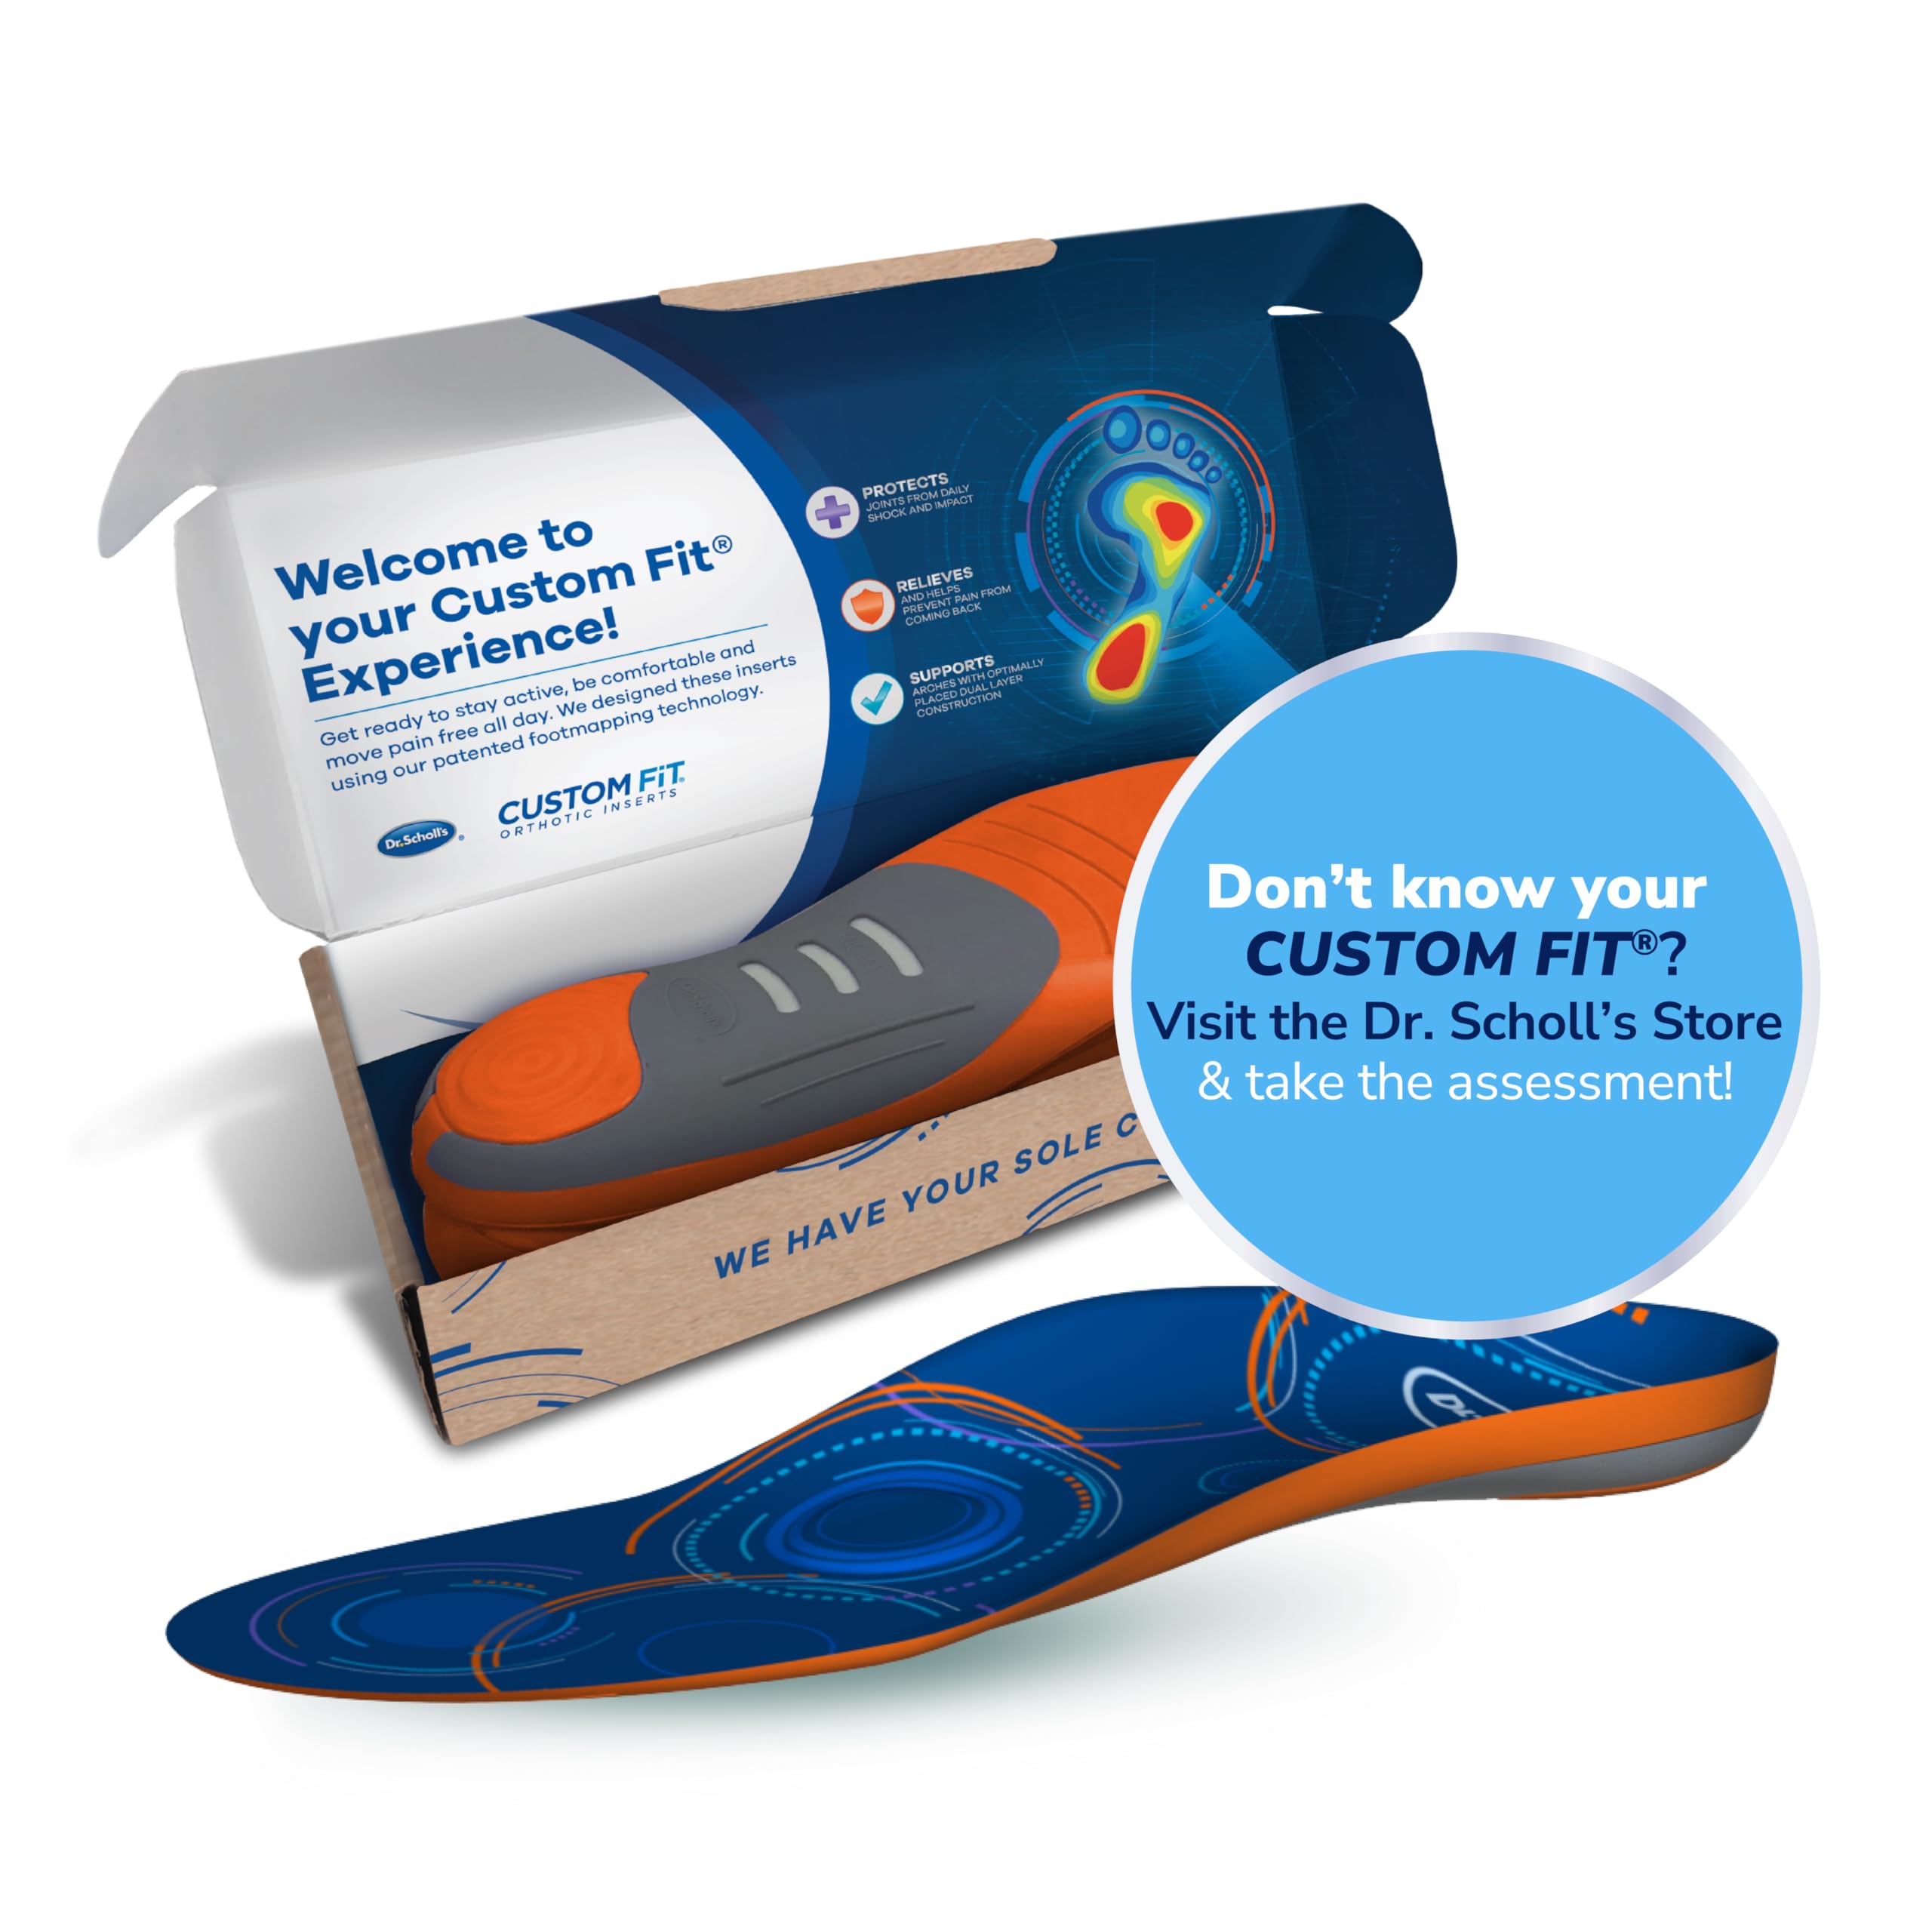 Dr. Scholl’s Custom Fit Orthotics 3/4 Length Inserts, CF 740, Customized for Your Foot & Arch, Immediate All-Day Pain Relief, Lower Back, Knee, Plantar Fascia, Heel, Insoles Fit Men & Womens Shoes